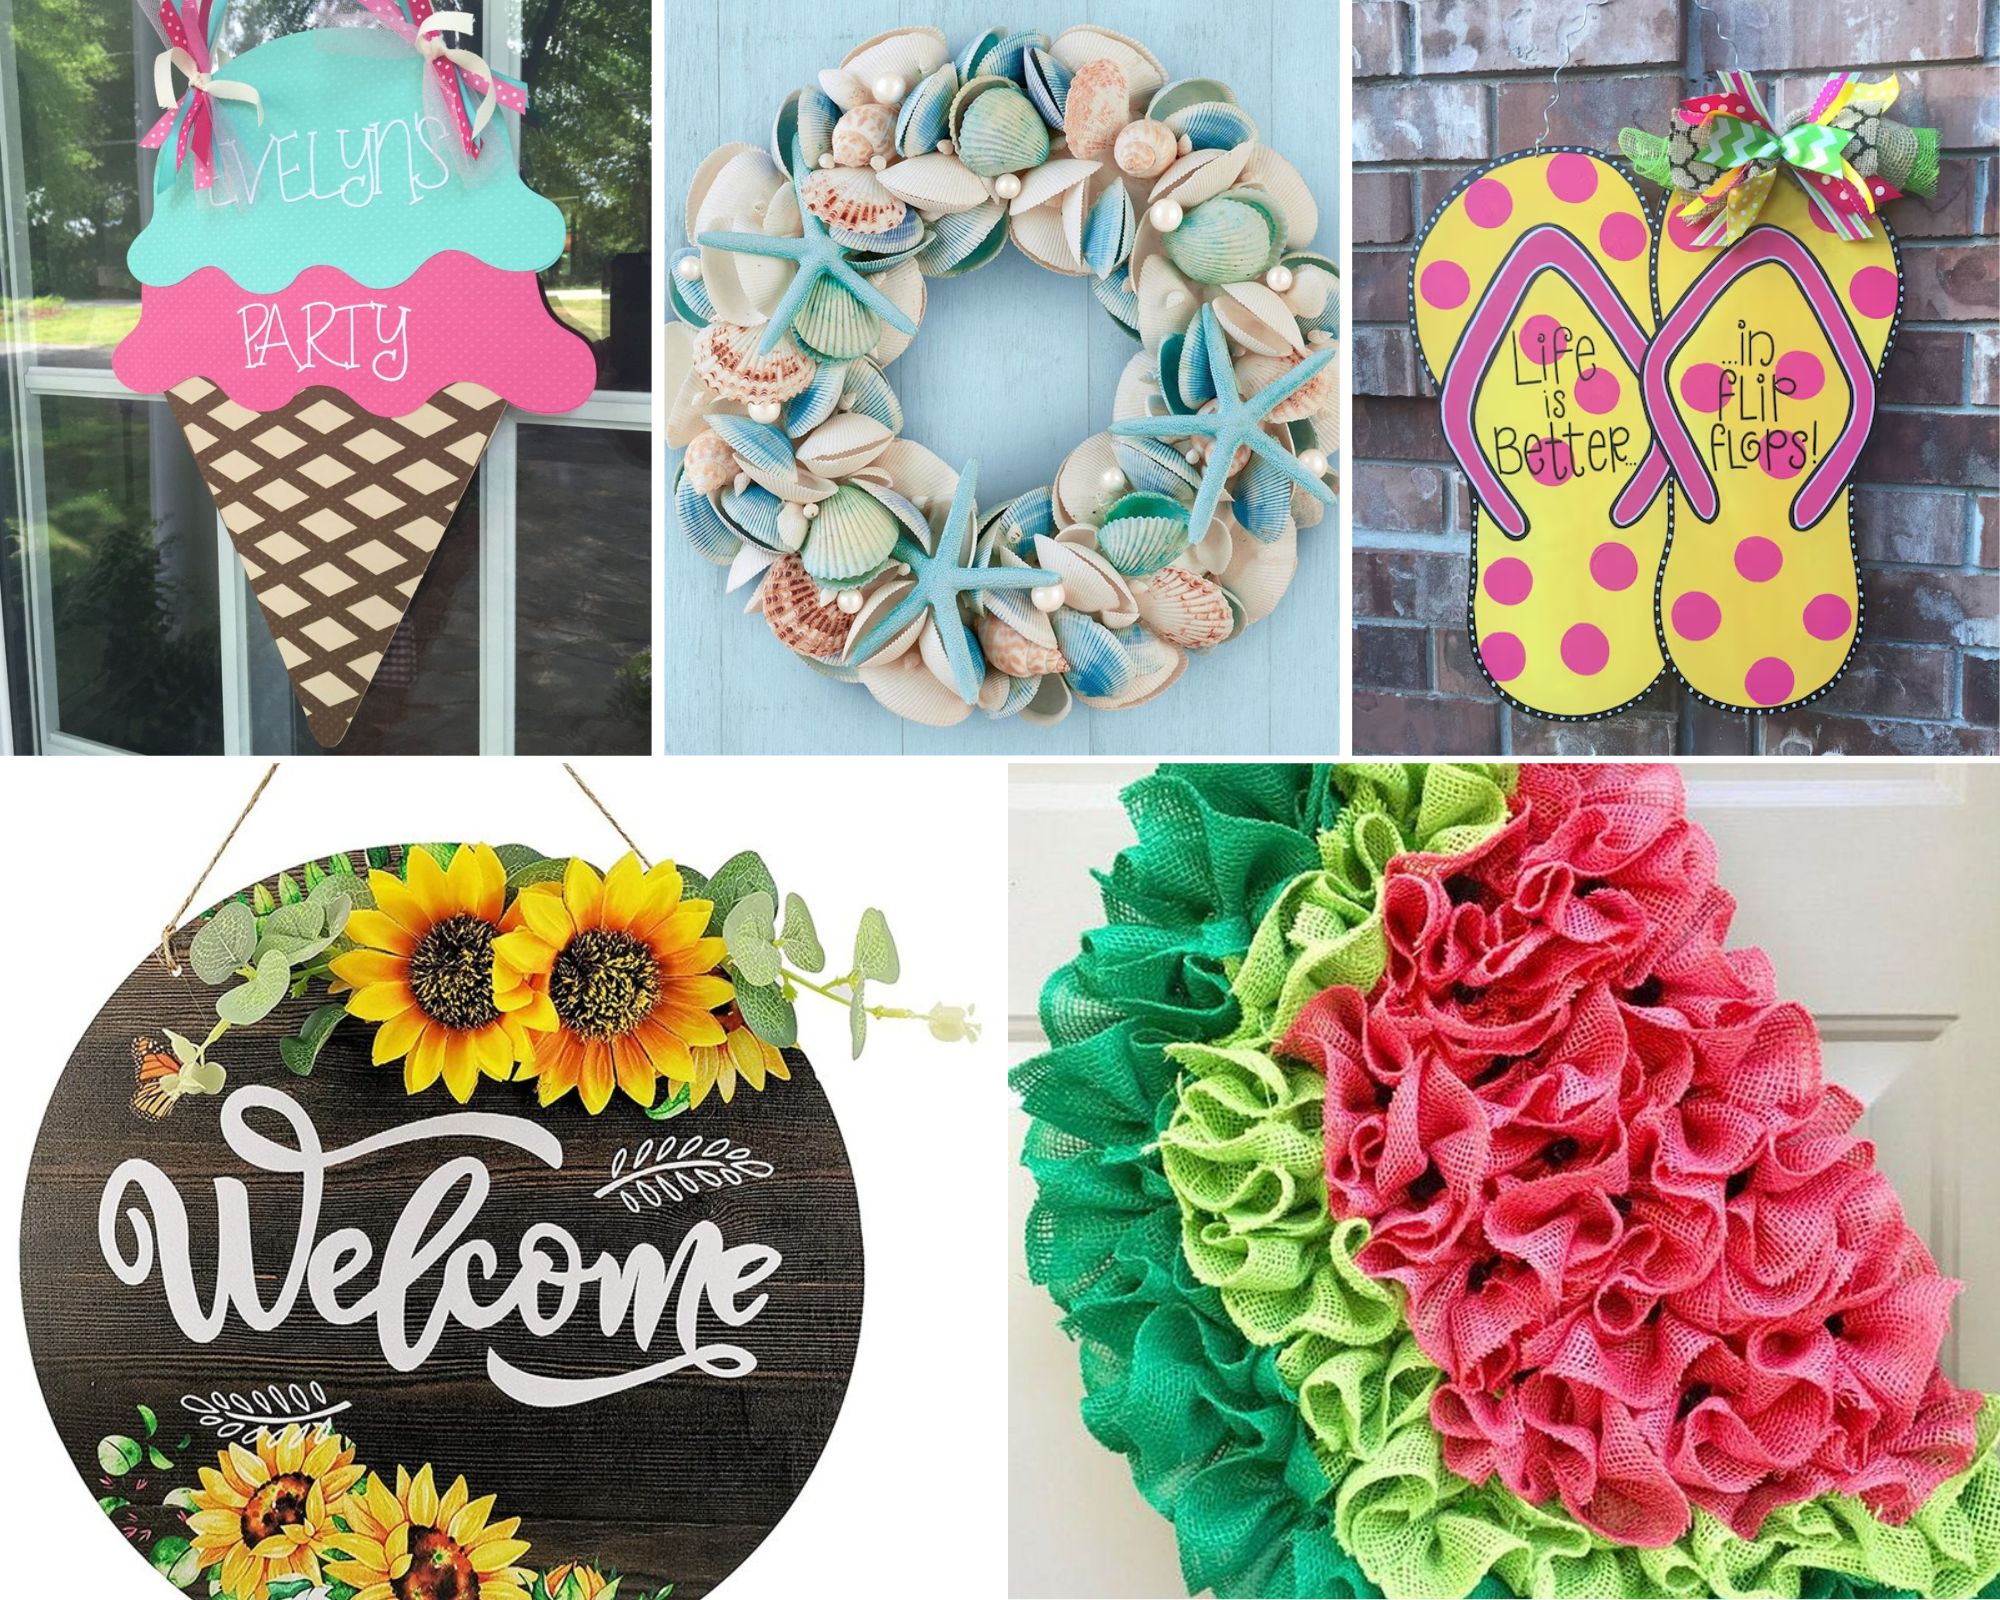 Spruce Up Your Home for Summer with 5 Festive Door Hangers Ideas